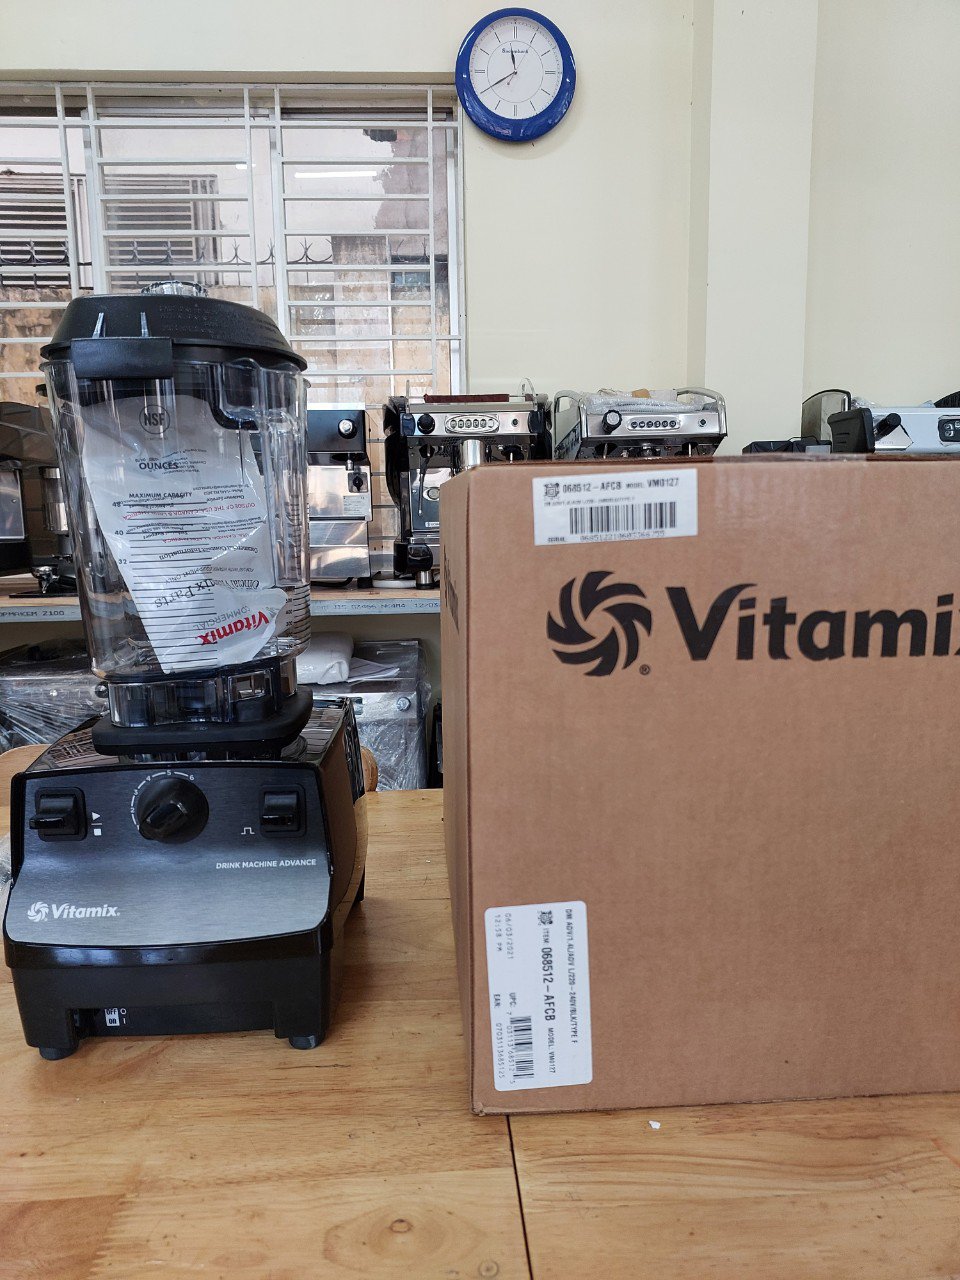 Clearance sale: Vitamix blenders at a discounted price of 40% off.